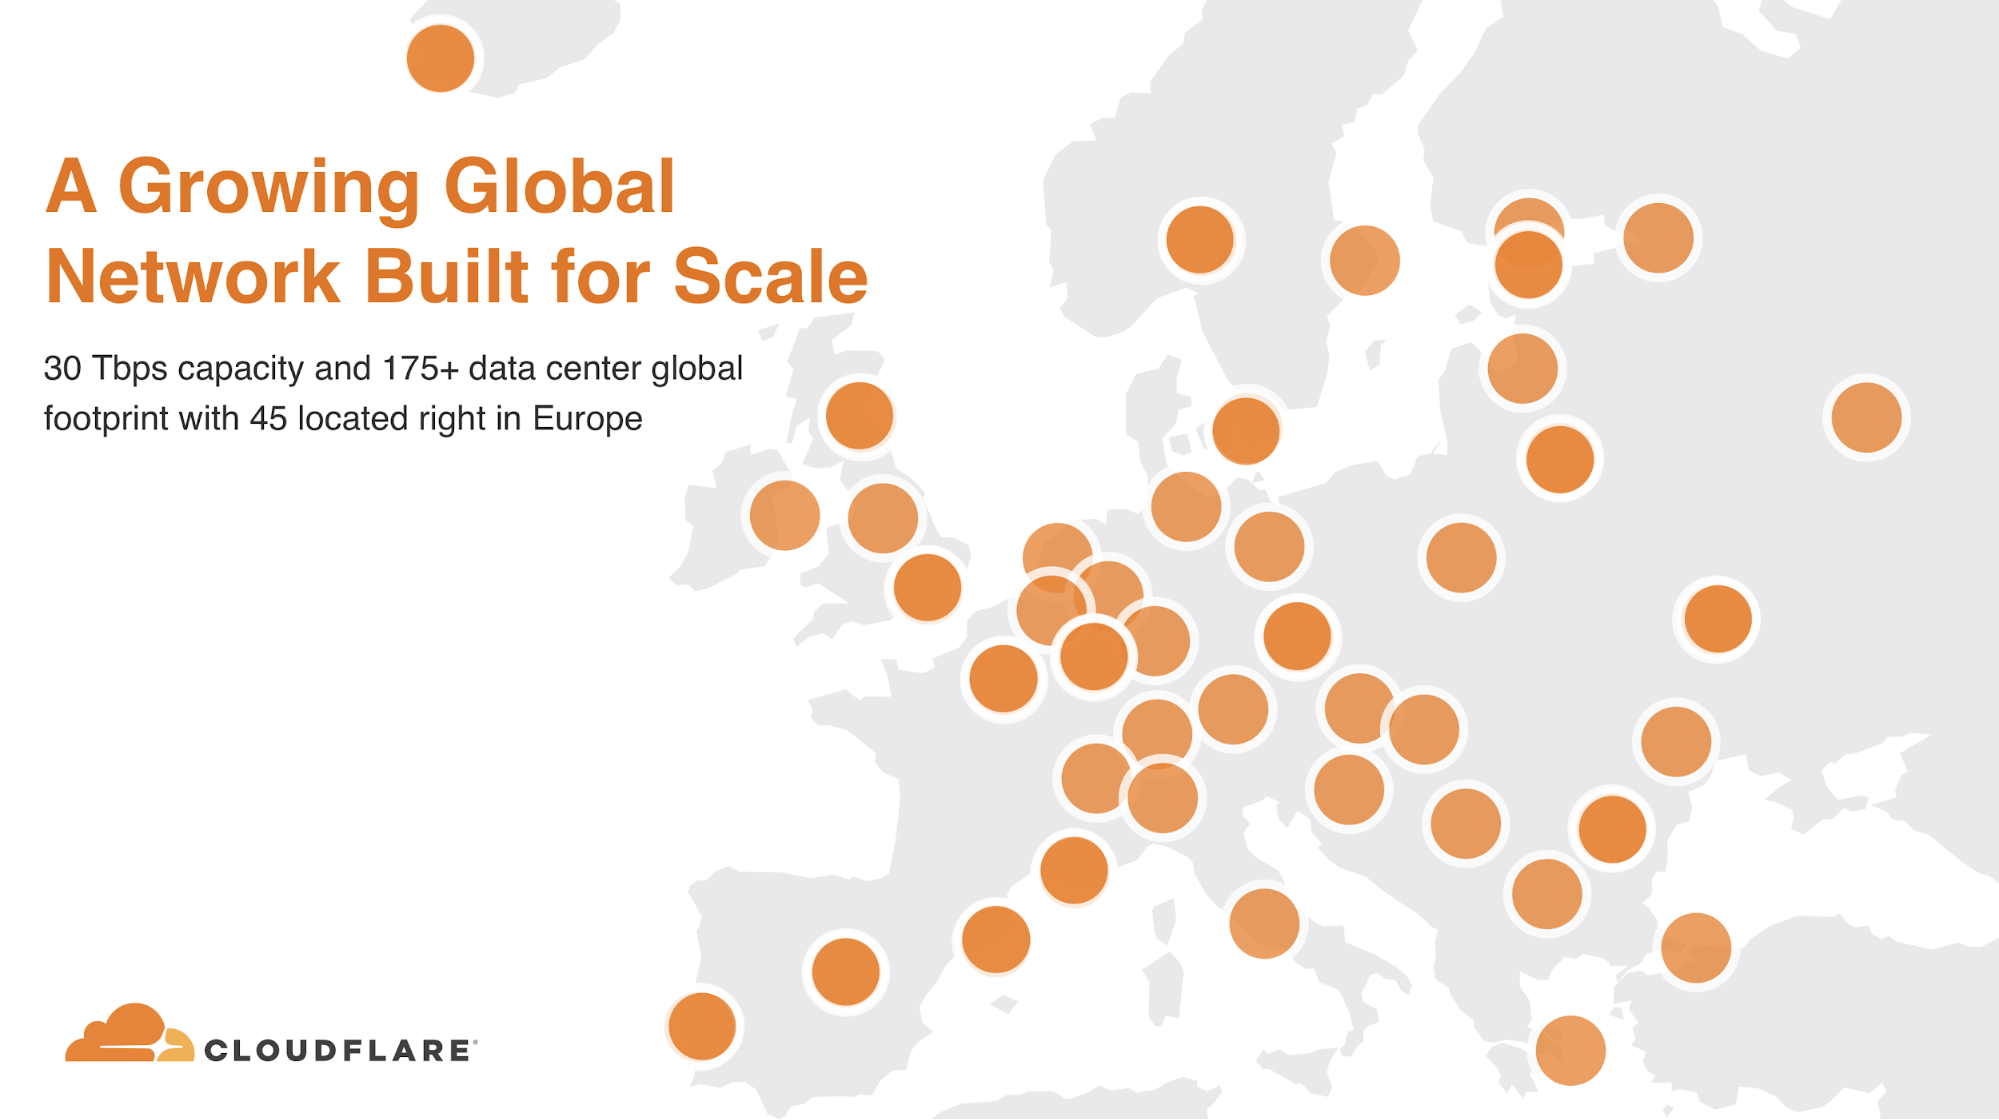 Making progress in Cloudflare's EMEA operations, and looking ahead to a bright future